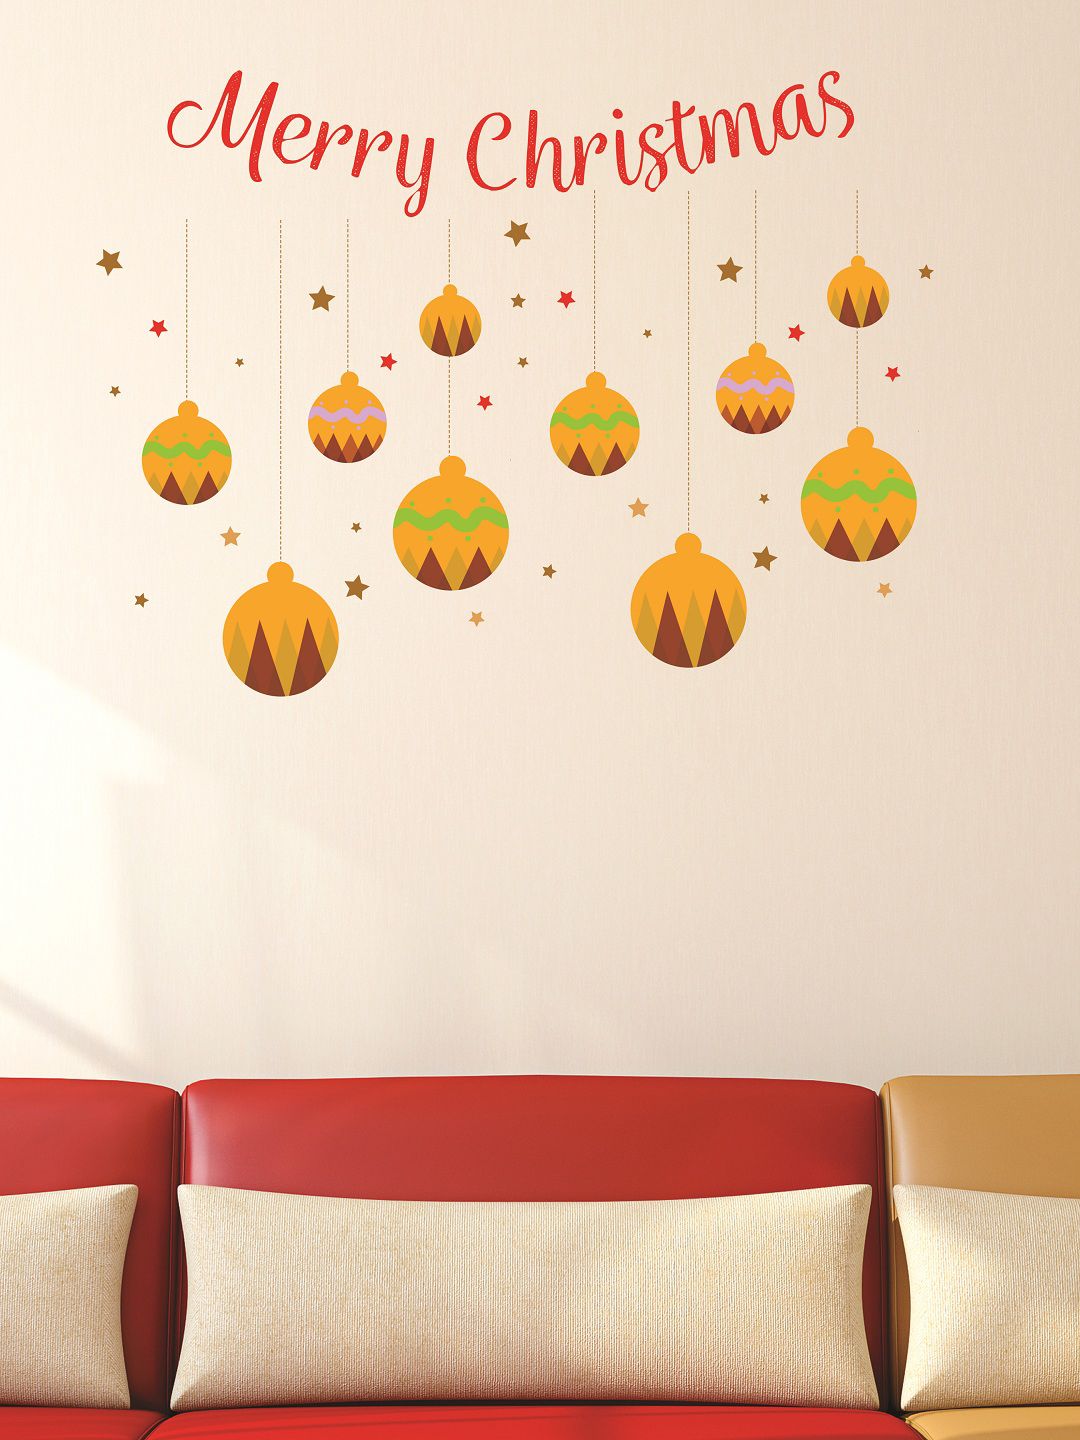 WALLSTICK Red & Yellow Merry Christmas Large Vinyl Wall Sticker Price in India